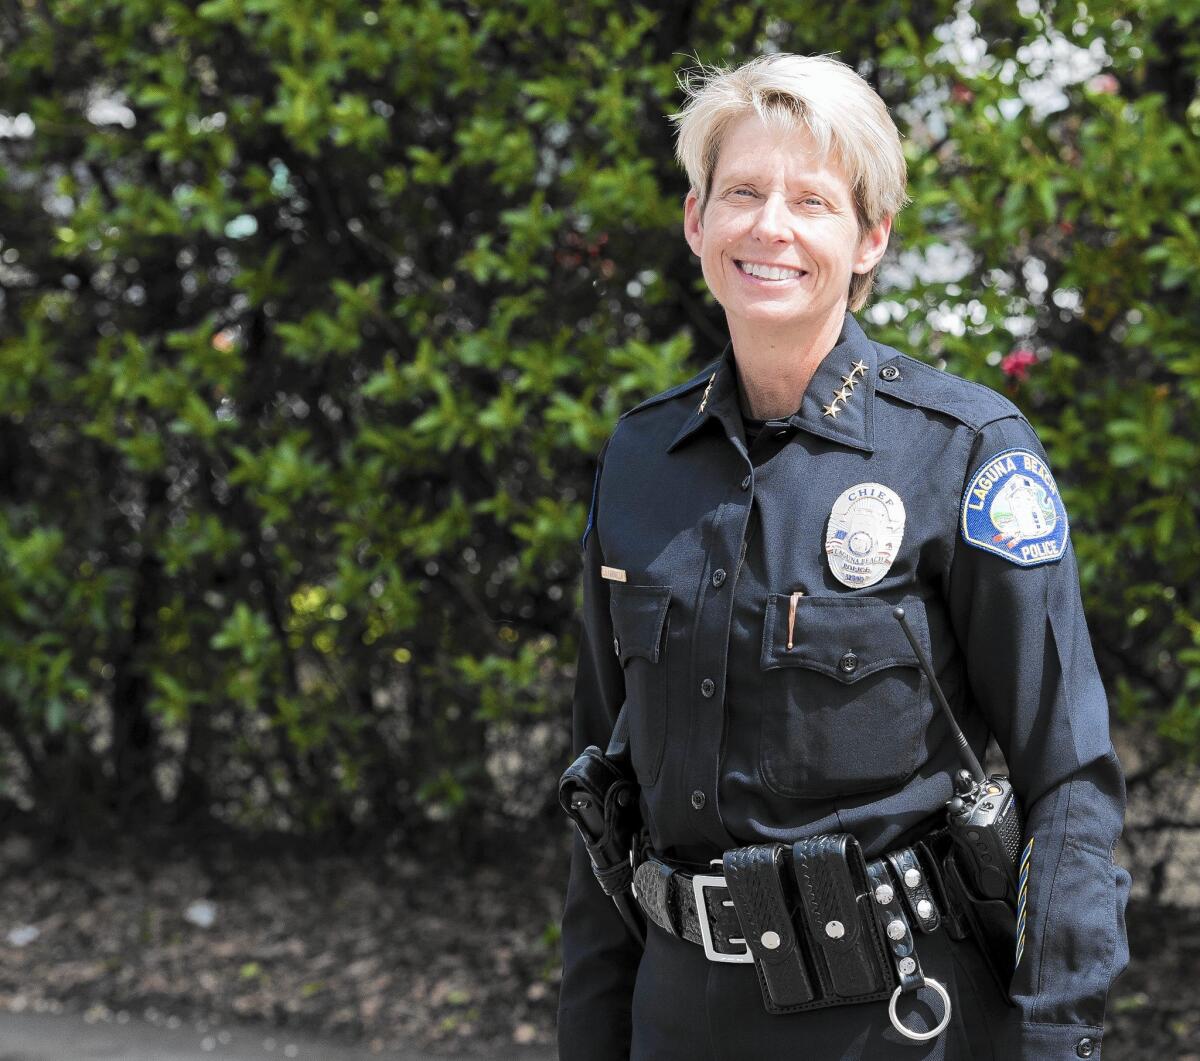 Laura Farinella is the Laguna Beach Police Department's first female chief and its 16th overall. She stepped into the role in March 2015 and plans to close out her 30-year career in law enforcement in July.